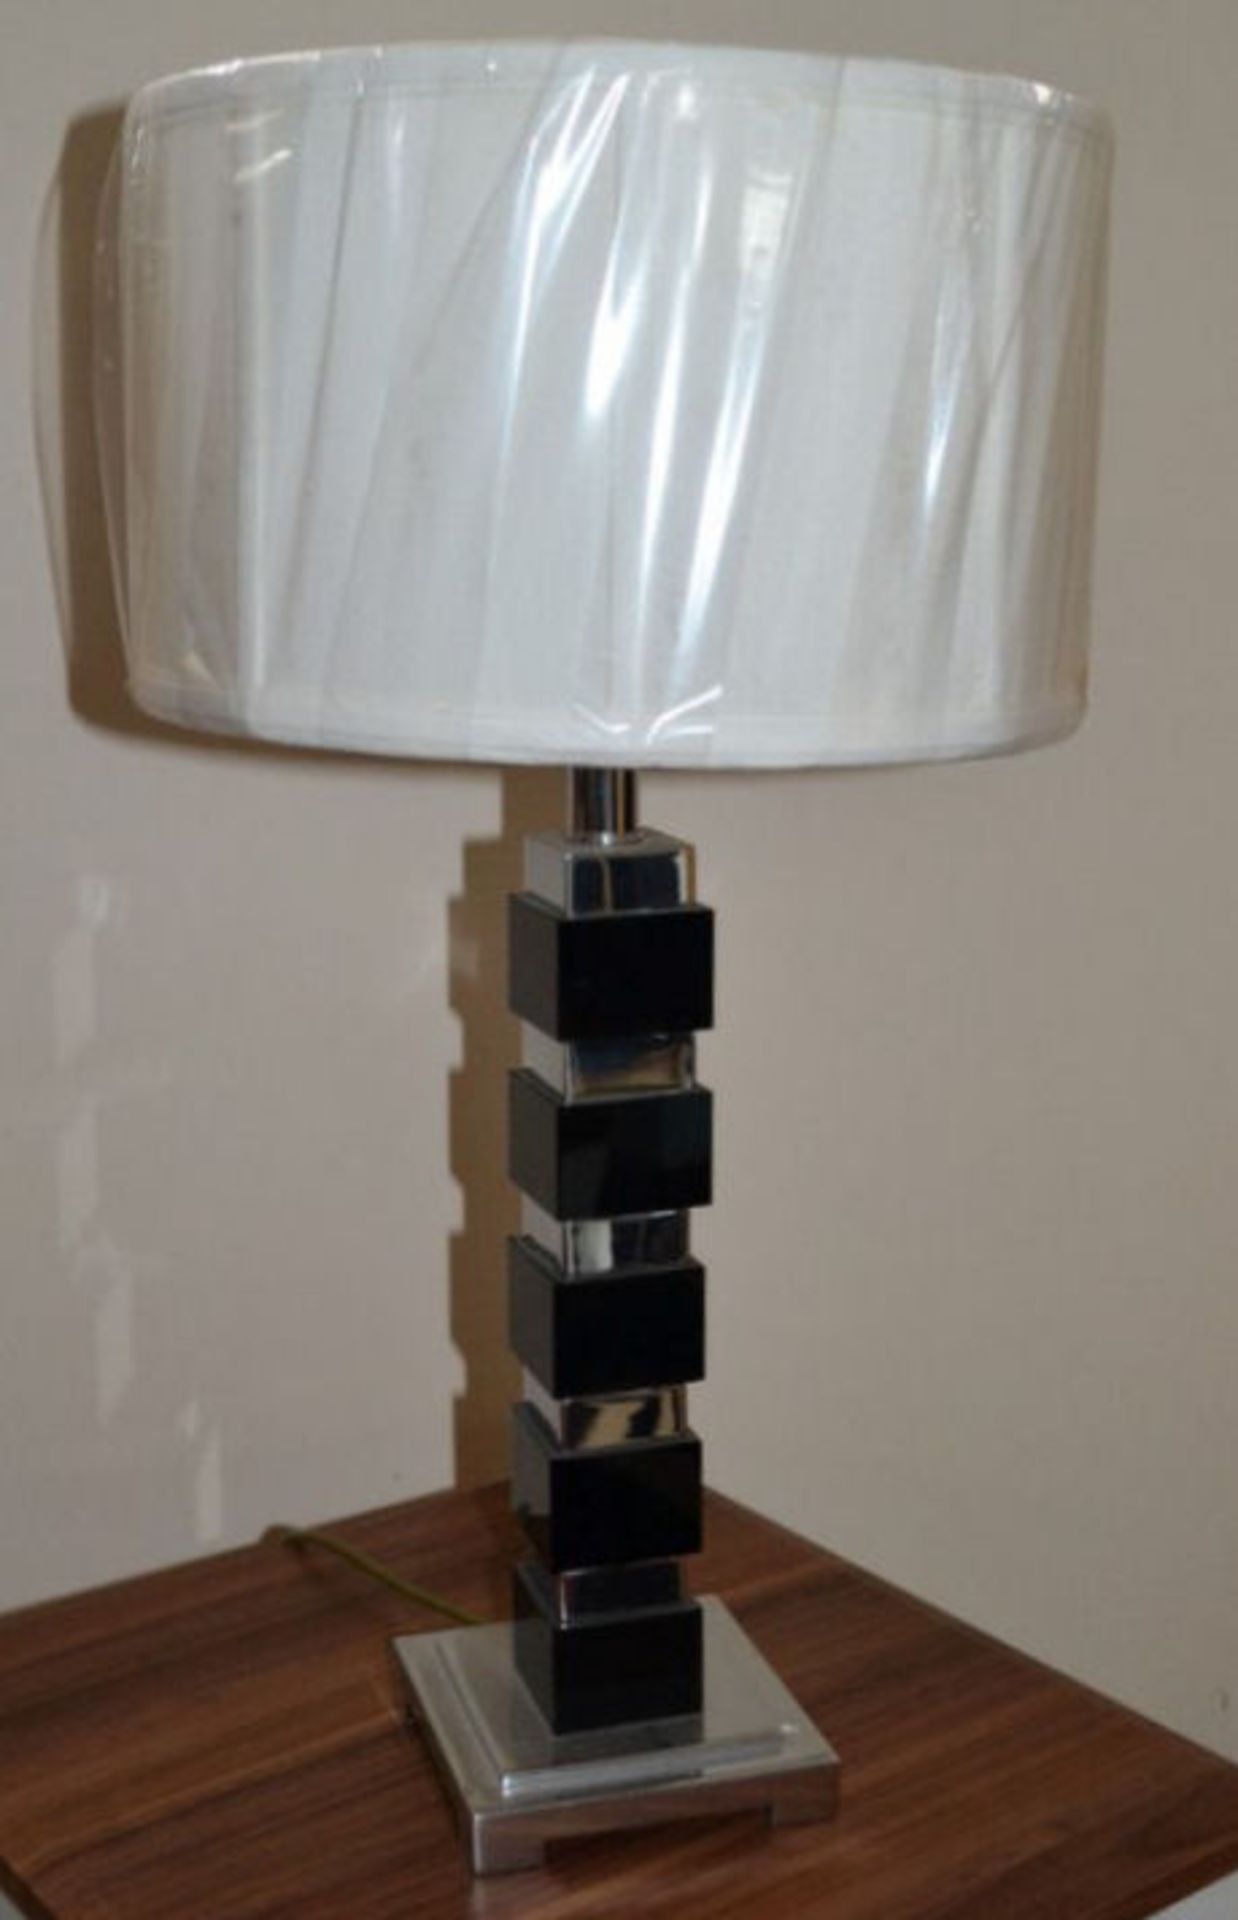 1 x Silver And Black Lamp, White Shade. Total Height 62cm. - Image 4 of 5